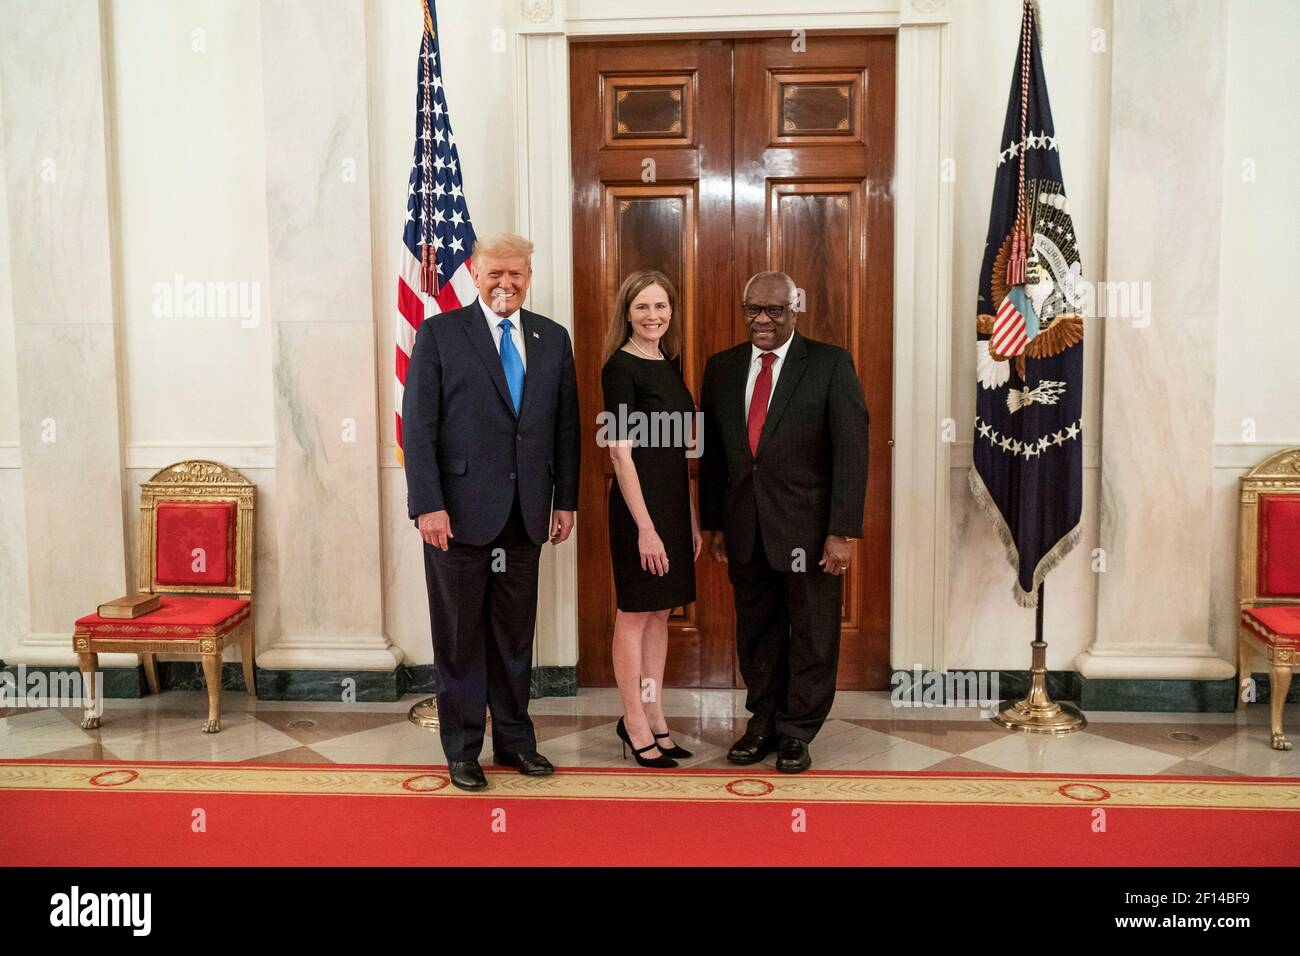 President Donald Trump joined by associate U.S. Supreme Court Justice Clarence Thomas poses with Judge Amy Coney Barrett  in the Cross Hall of the White House following her swearing-in as Associate Justice of the U.S. Supreme Court Monday Oct. 26 2020 on the South Lawn of the White House. Stock Photo